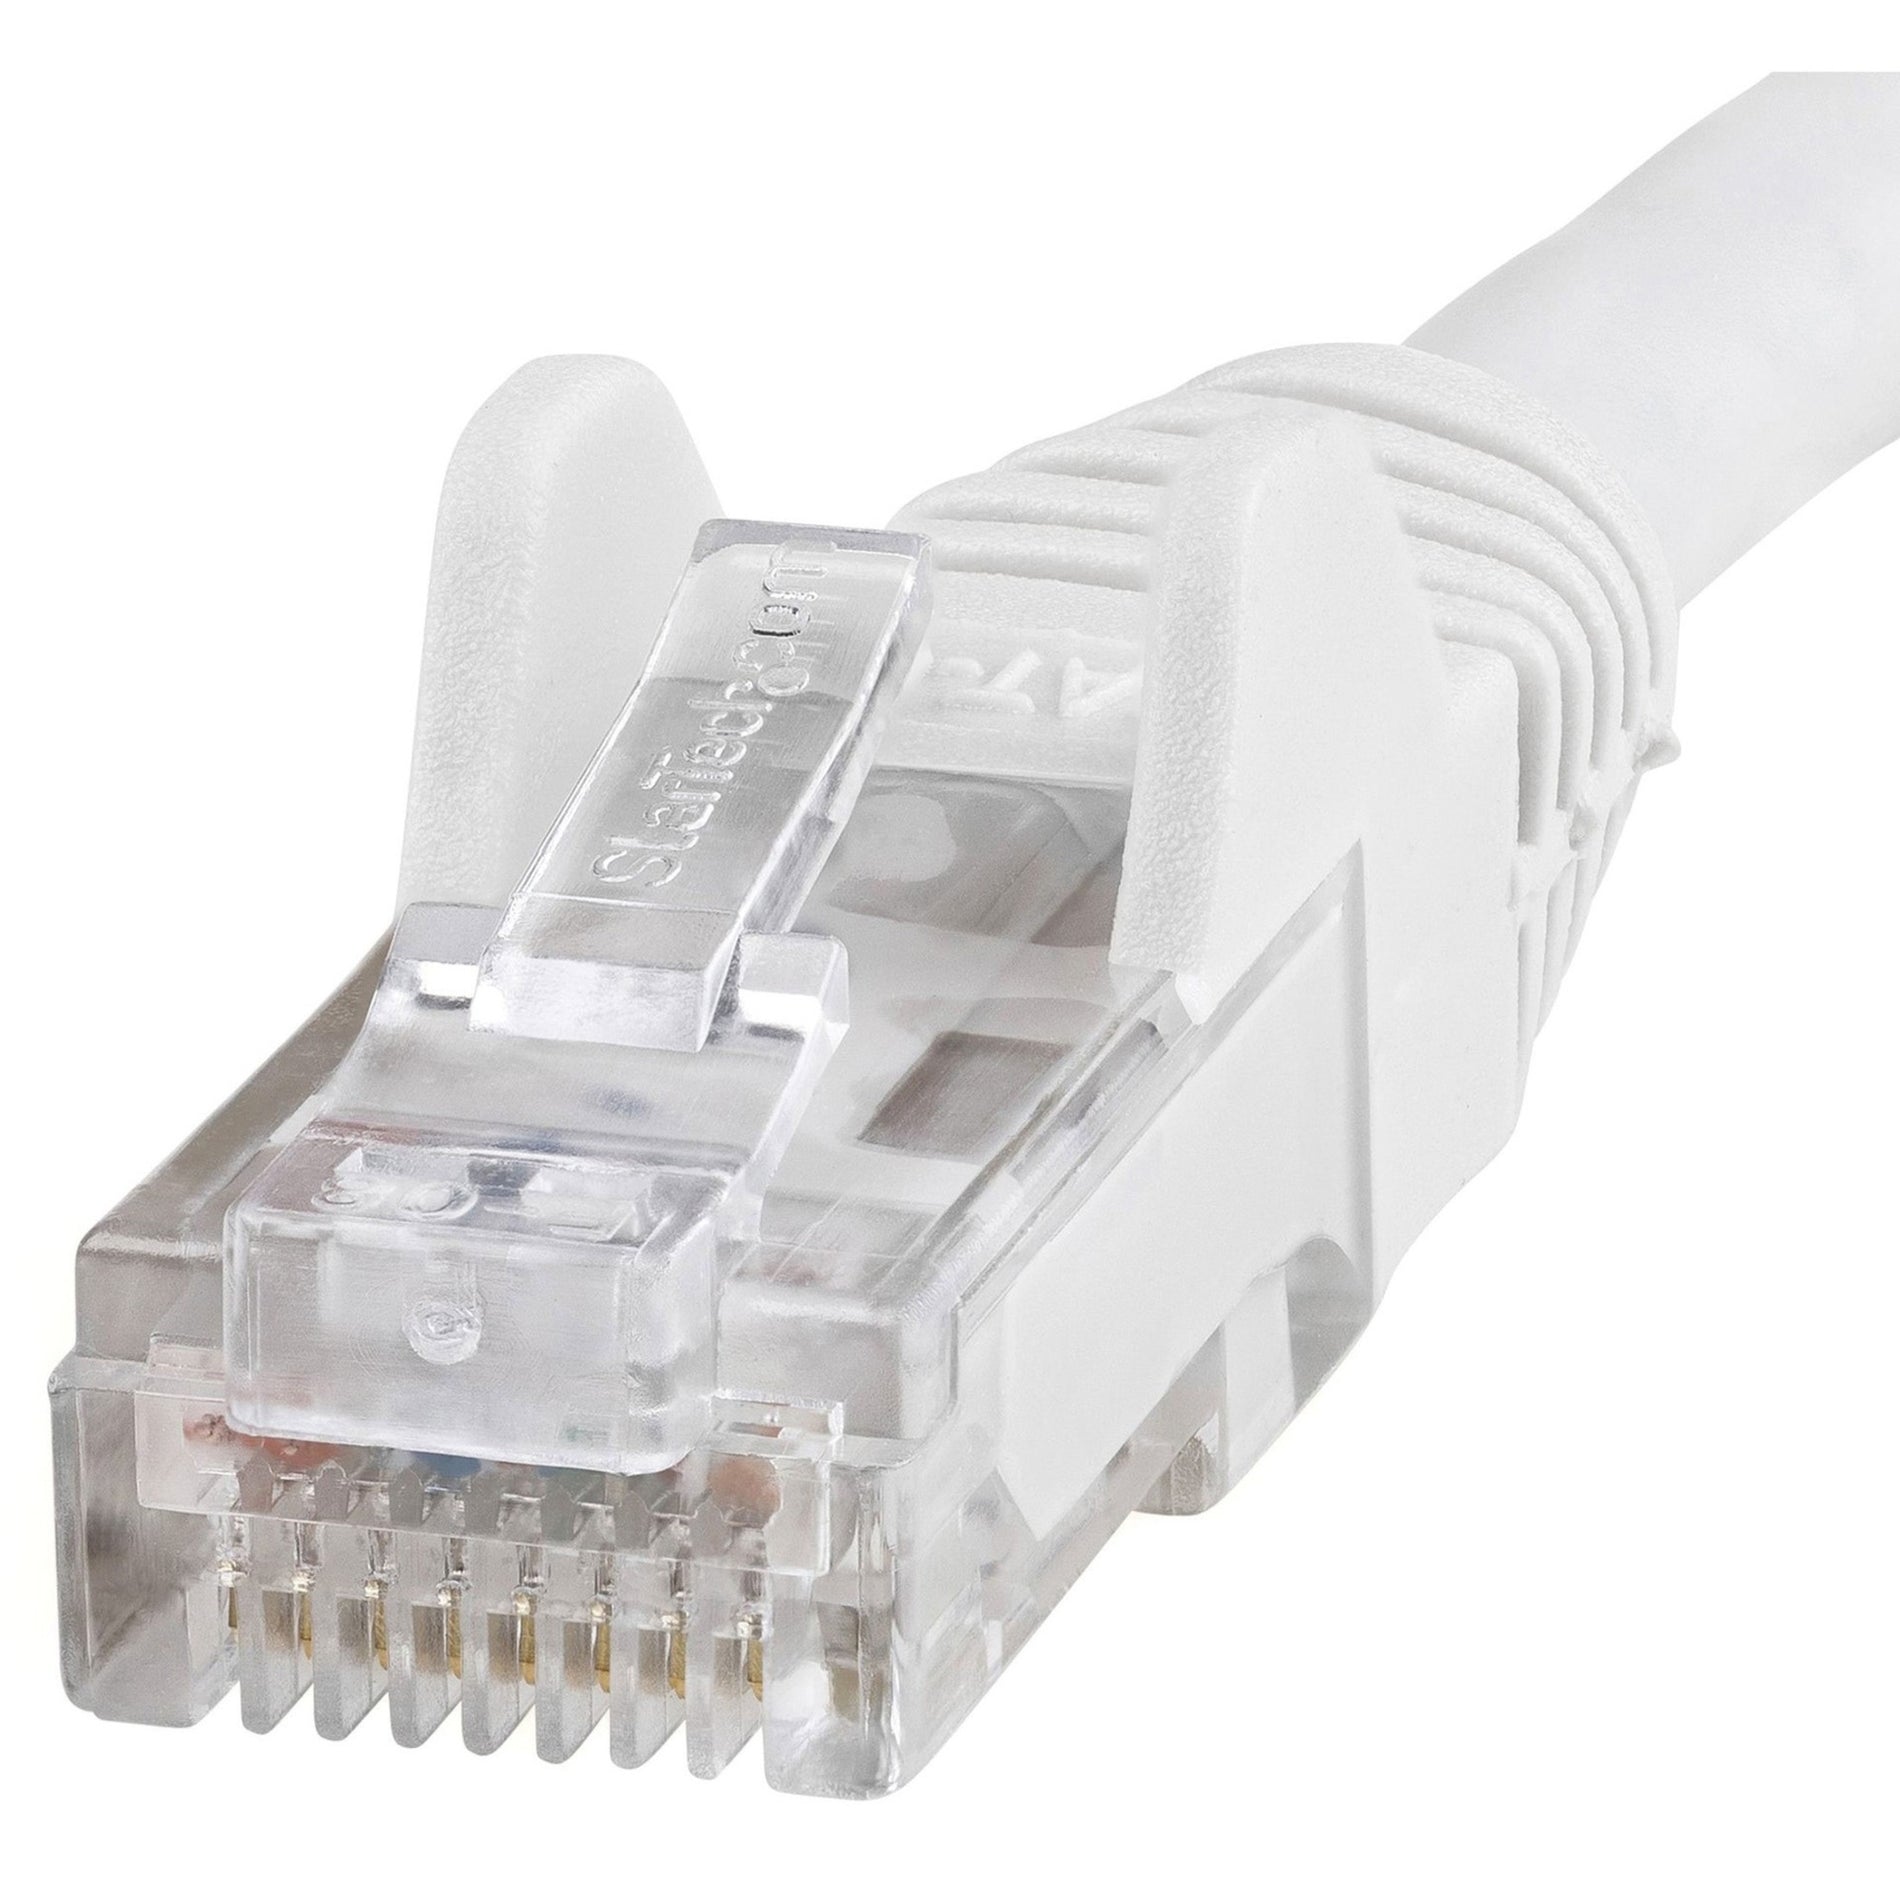 StarTech.com N6PATCH20WH Cat. 6 Network Cable, 20ft White Ethernet Cable, Snagless RJ45 Connectors